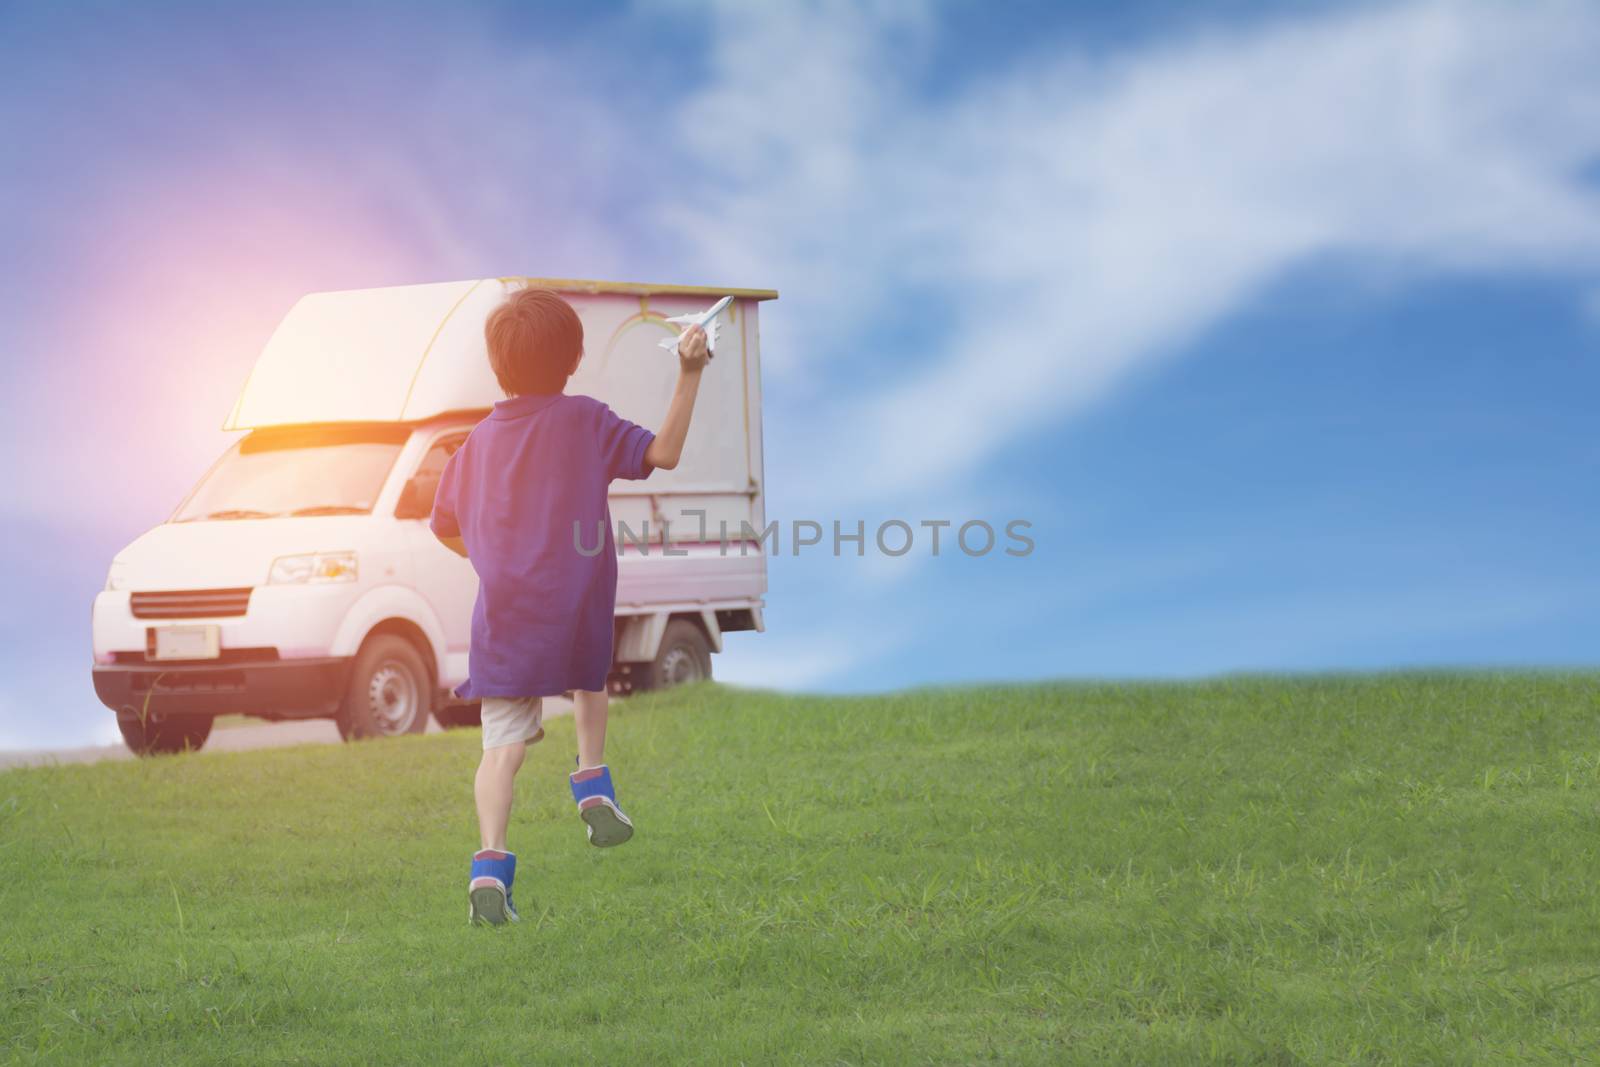 Kid playing with toy airplane and car. Kids playing with toy airplane at the day time. Kid having fun outdoors.